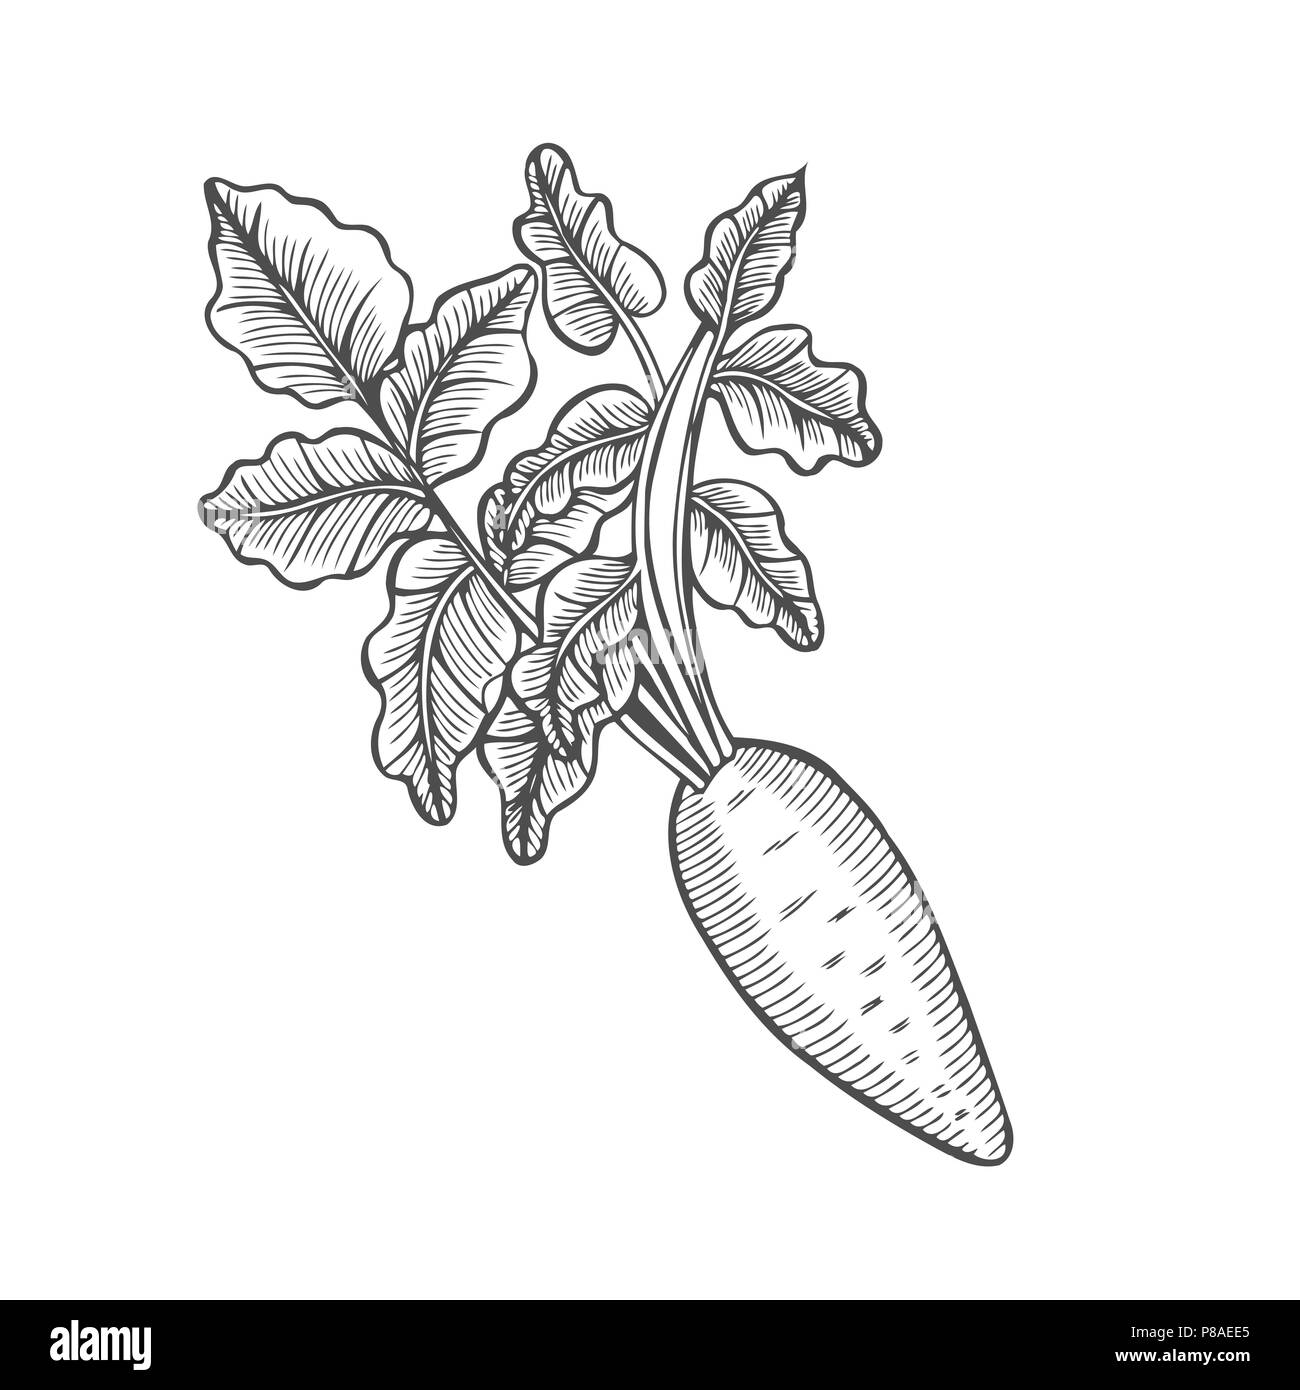 Turnip. Hand drawing of vegetable. Vector art illustration. Isolated image of black ink on white background. Vintage engraving. Kitchen design for dec Stock Vector